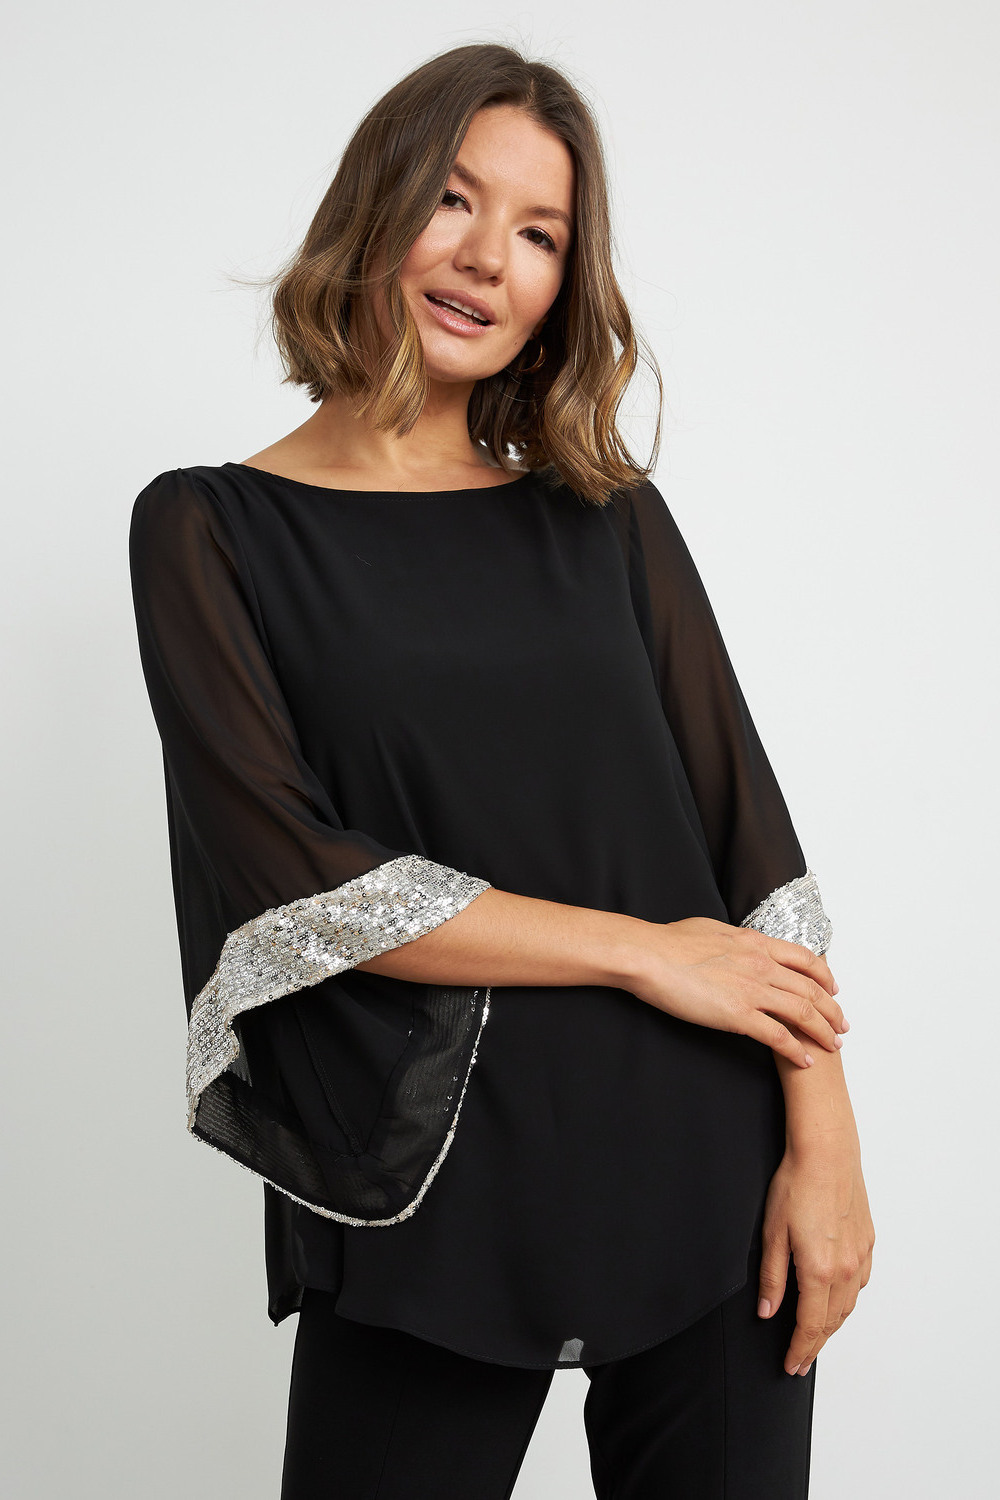 Joseph Ribkoff Sheer Sequined Blouse Style 204284. Black/silver